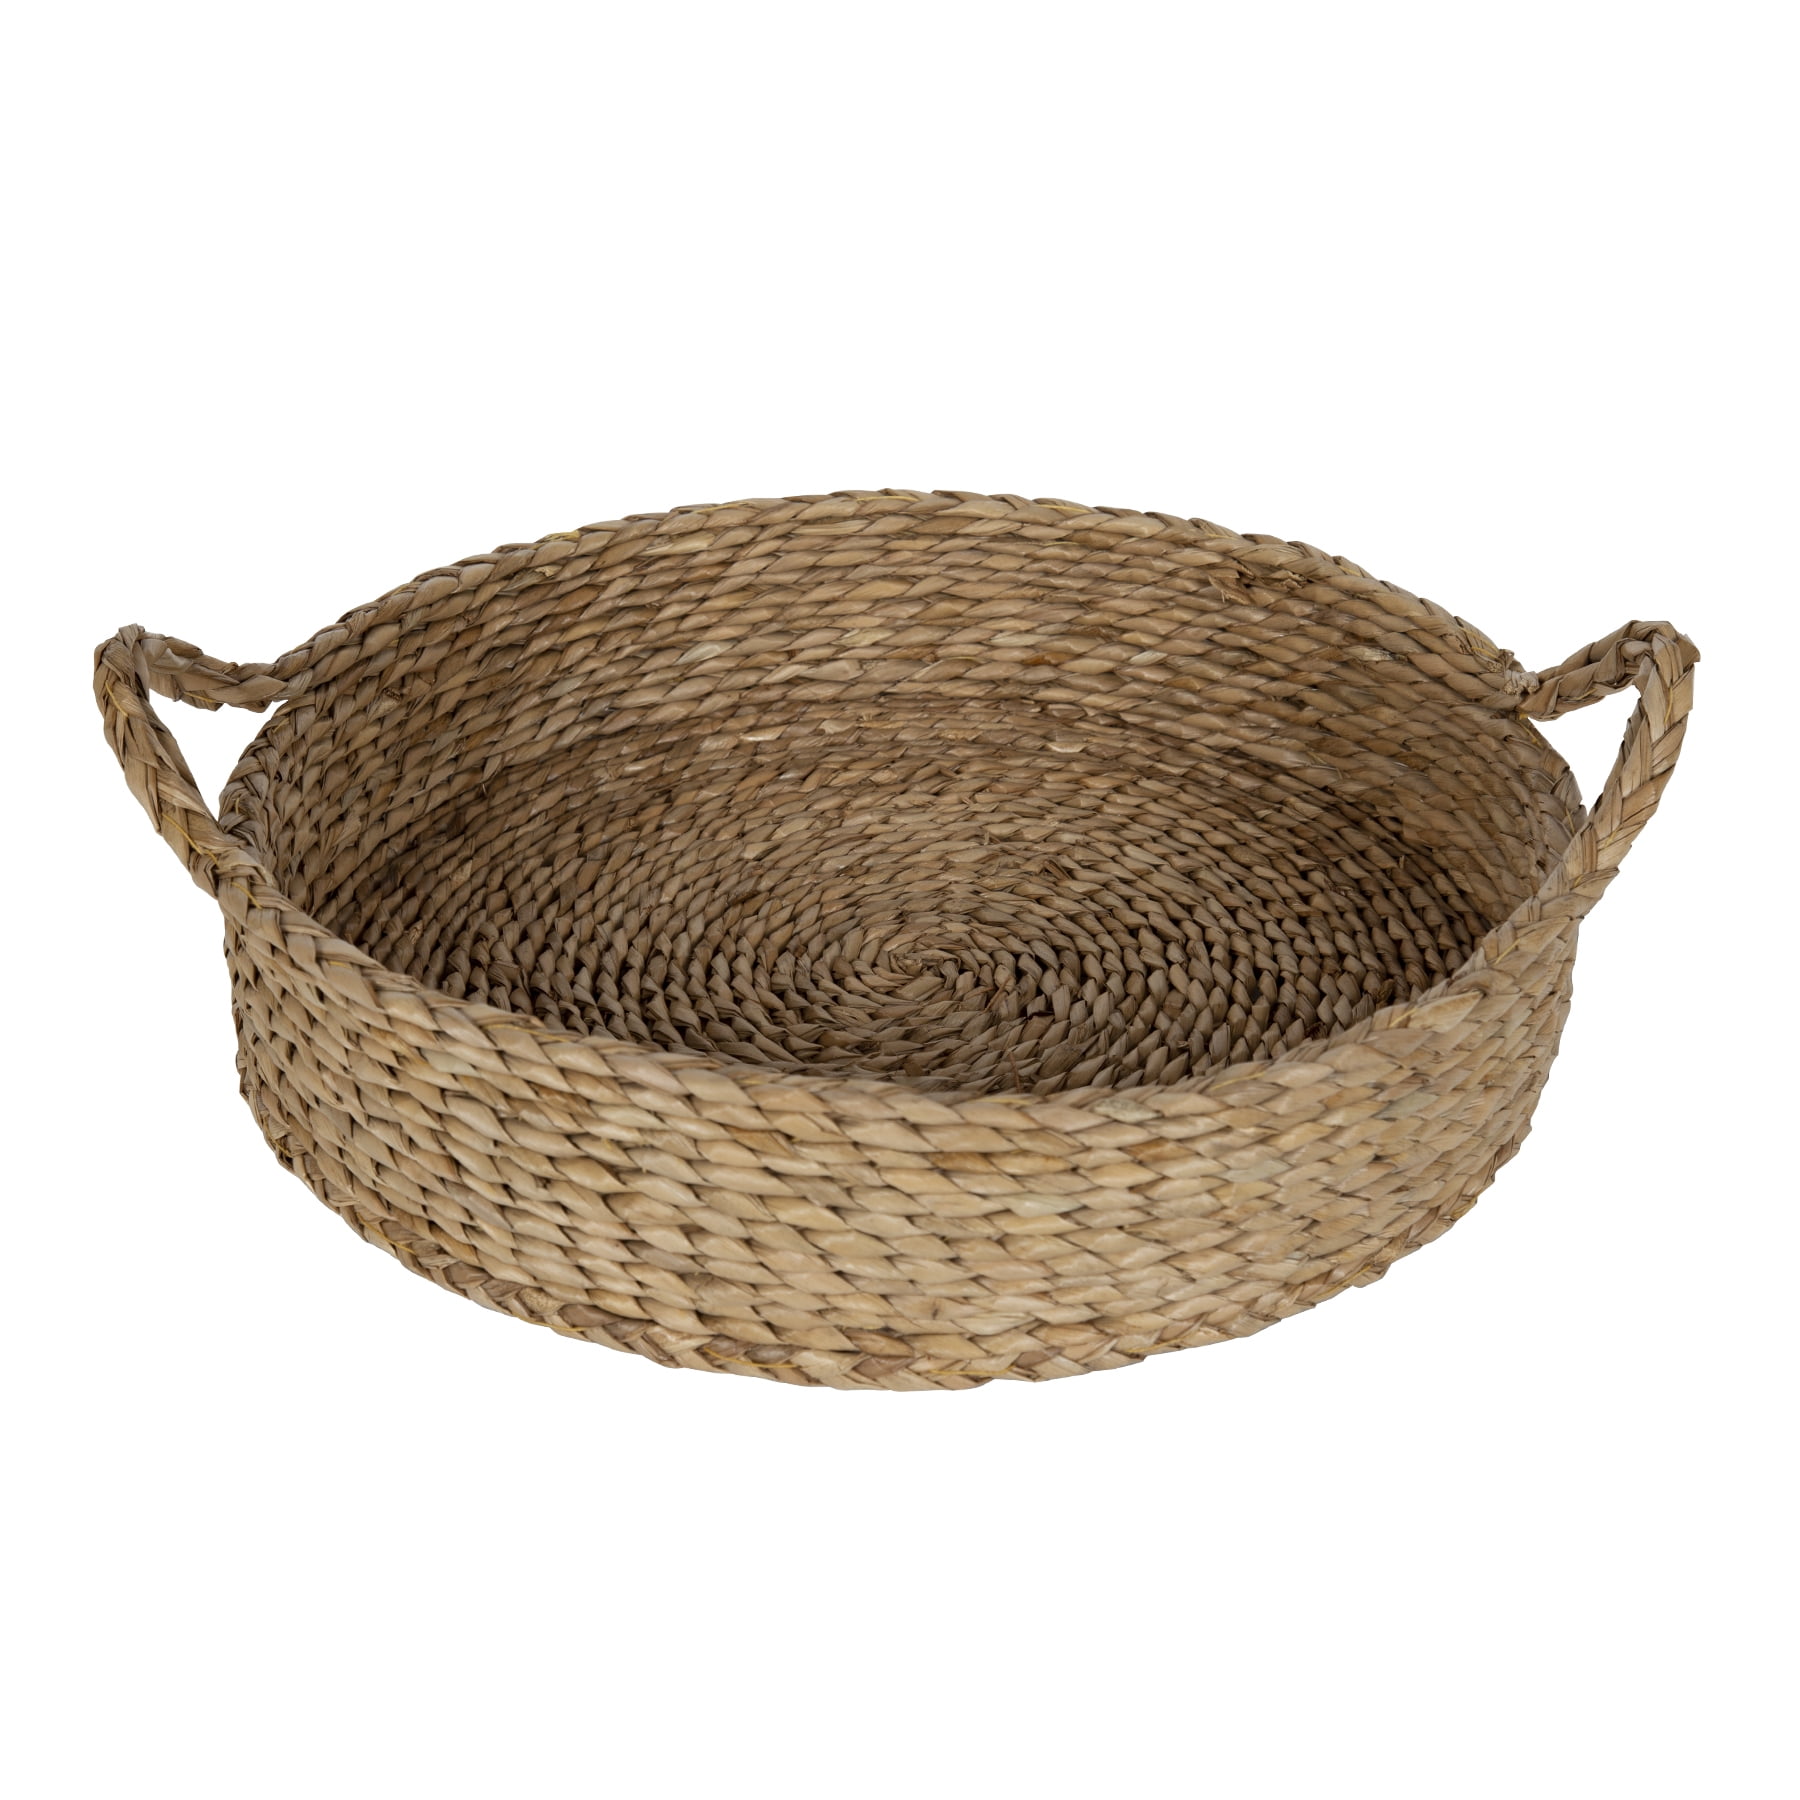 Better Homes & Gardens 16" Round Natural Colored Water Hyacinth Woven Tray